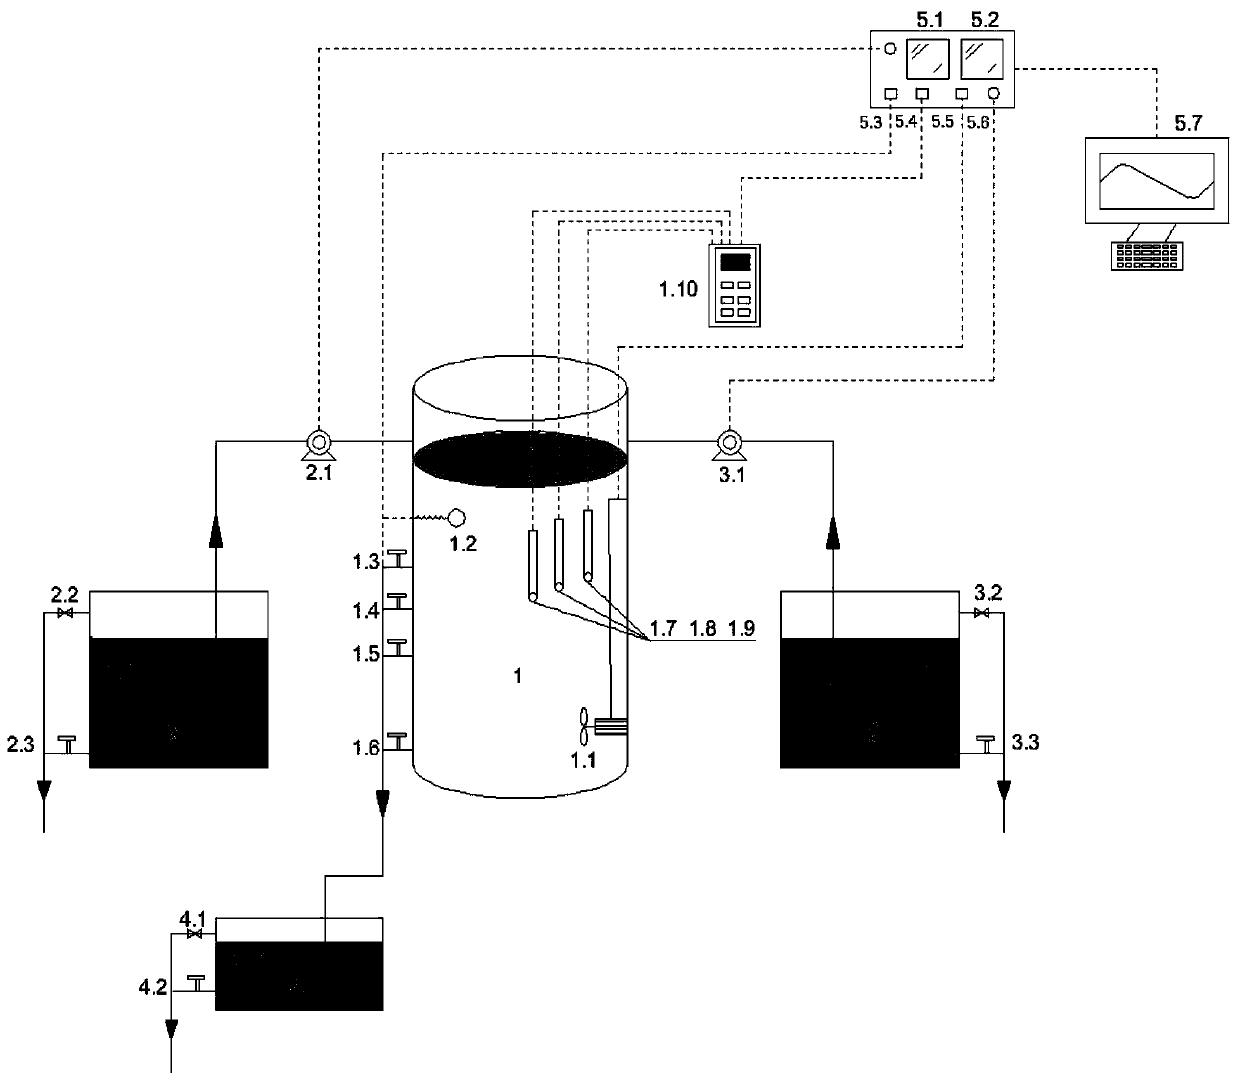 Method using delayed anaerobic/low-carbon anoxic sequencing batch reactor (SBR) for realizing municipal sewage short-cut denitrification process